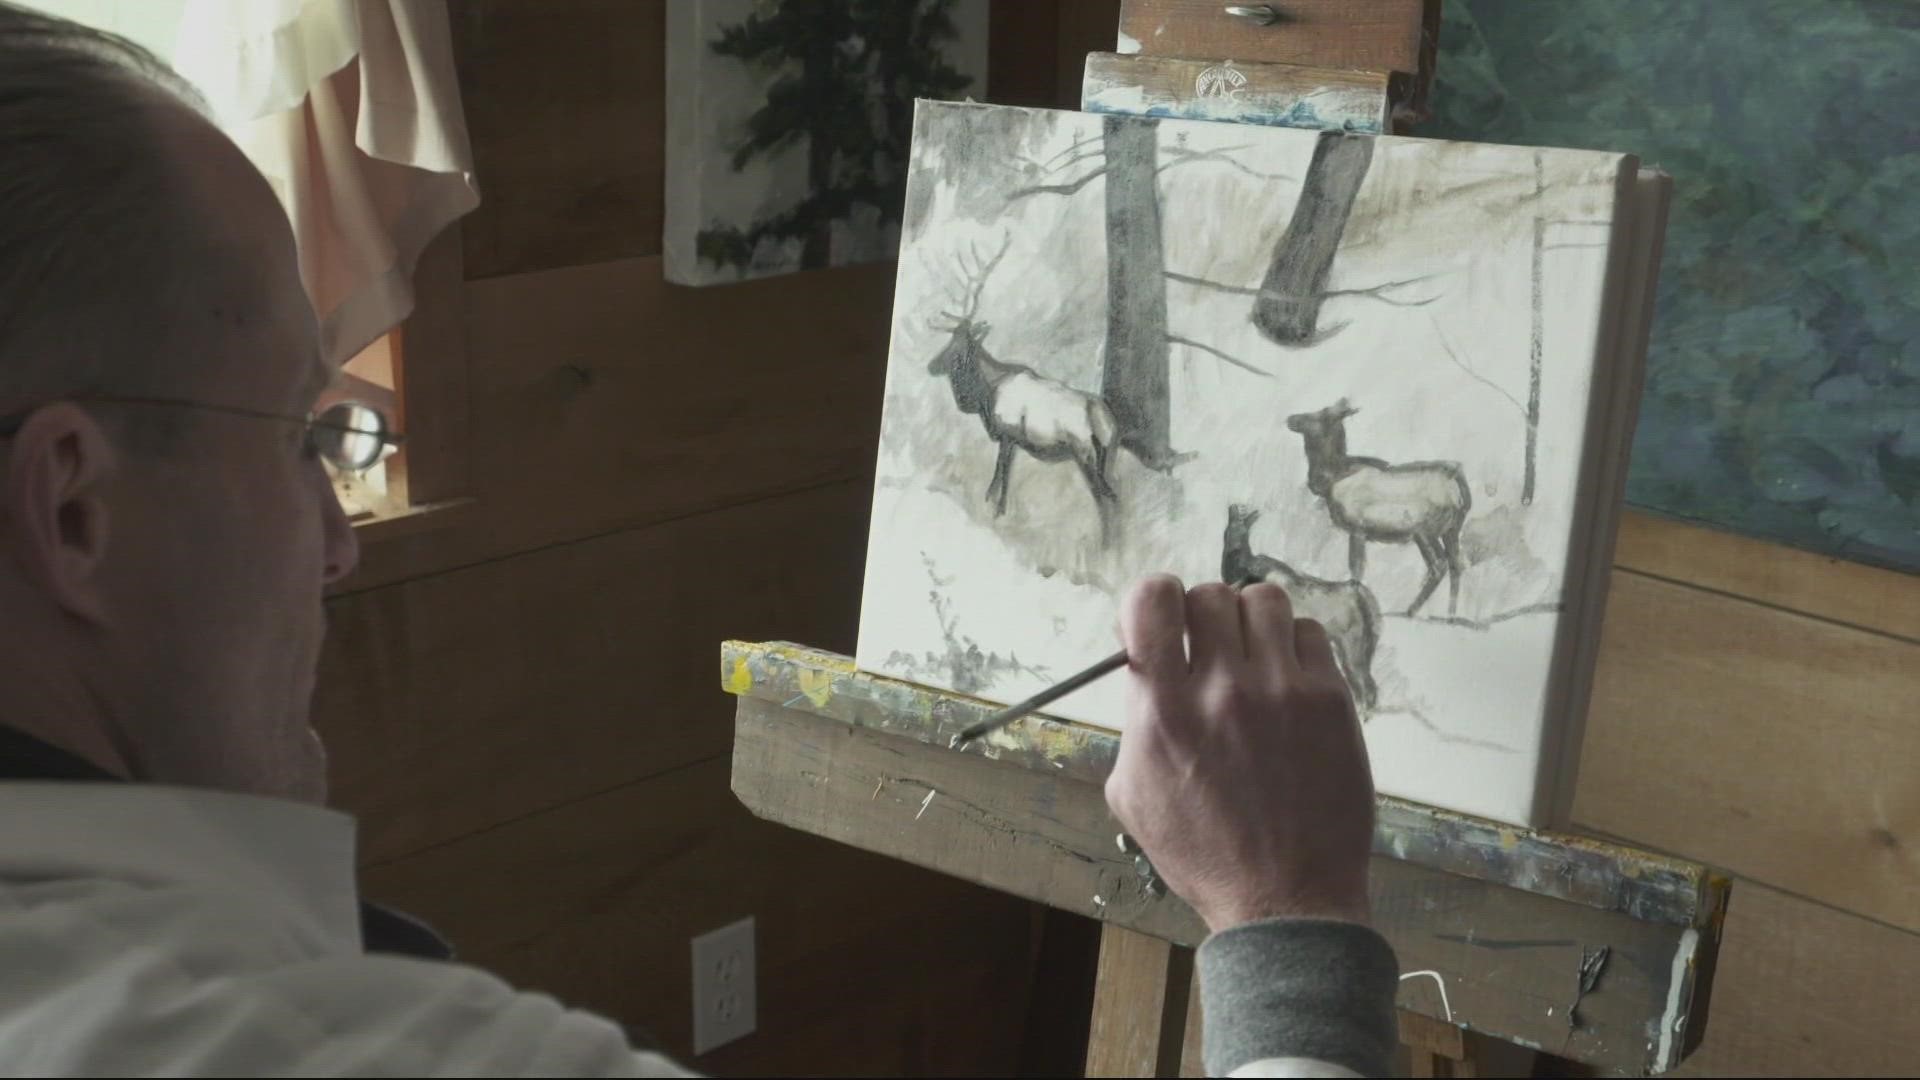 This week on Grant's Getaways, an artist’s gallery captures the majesty of elk amid the snow in Baker County.